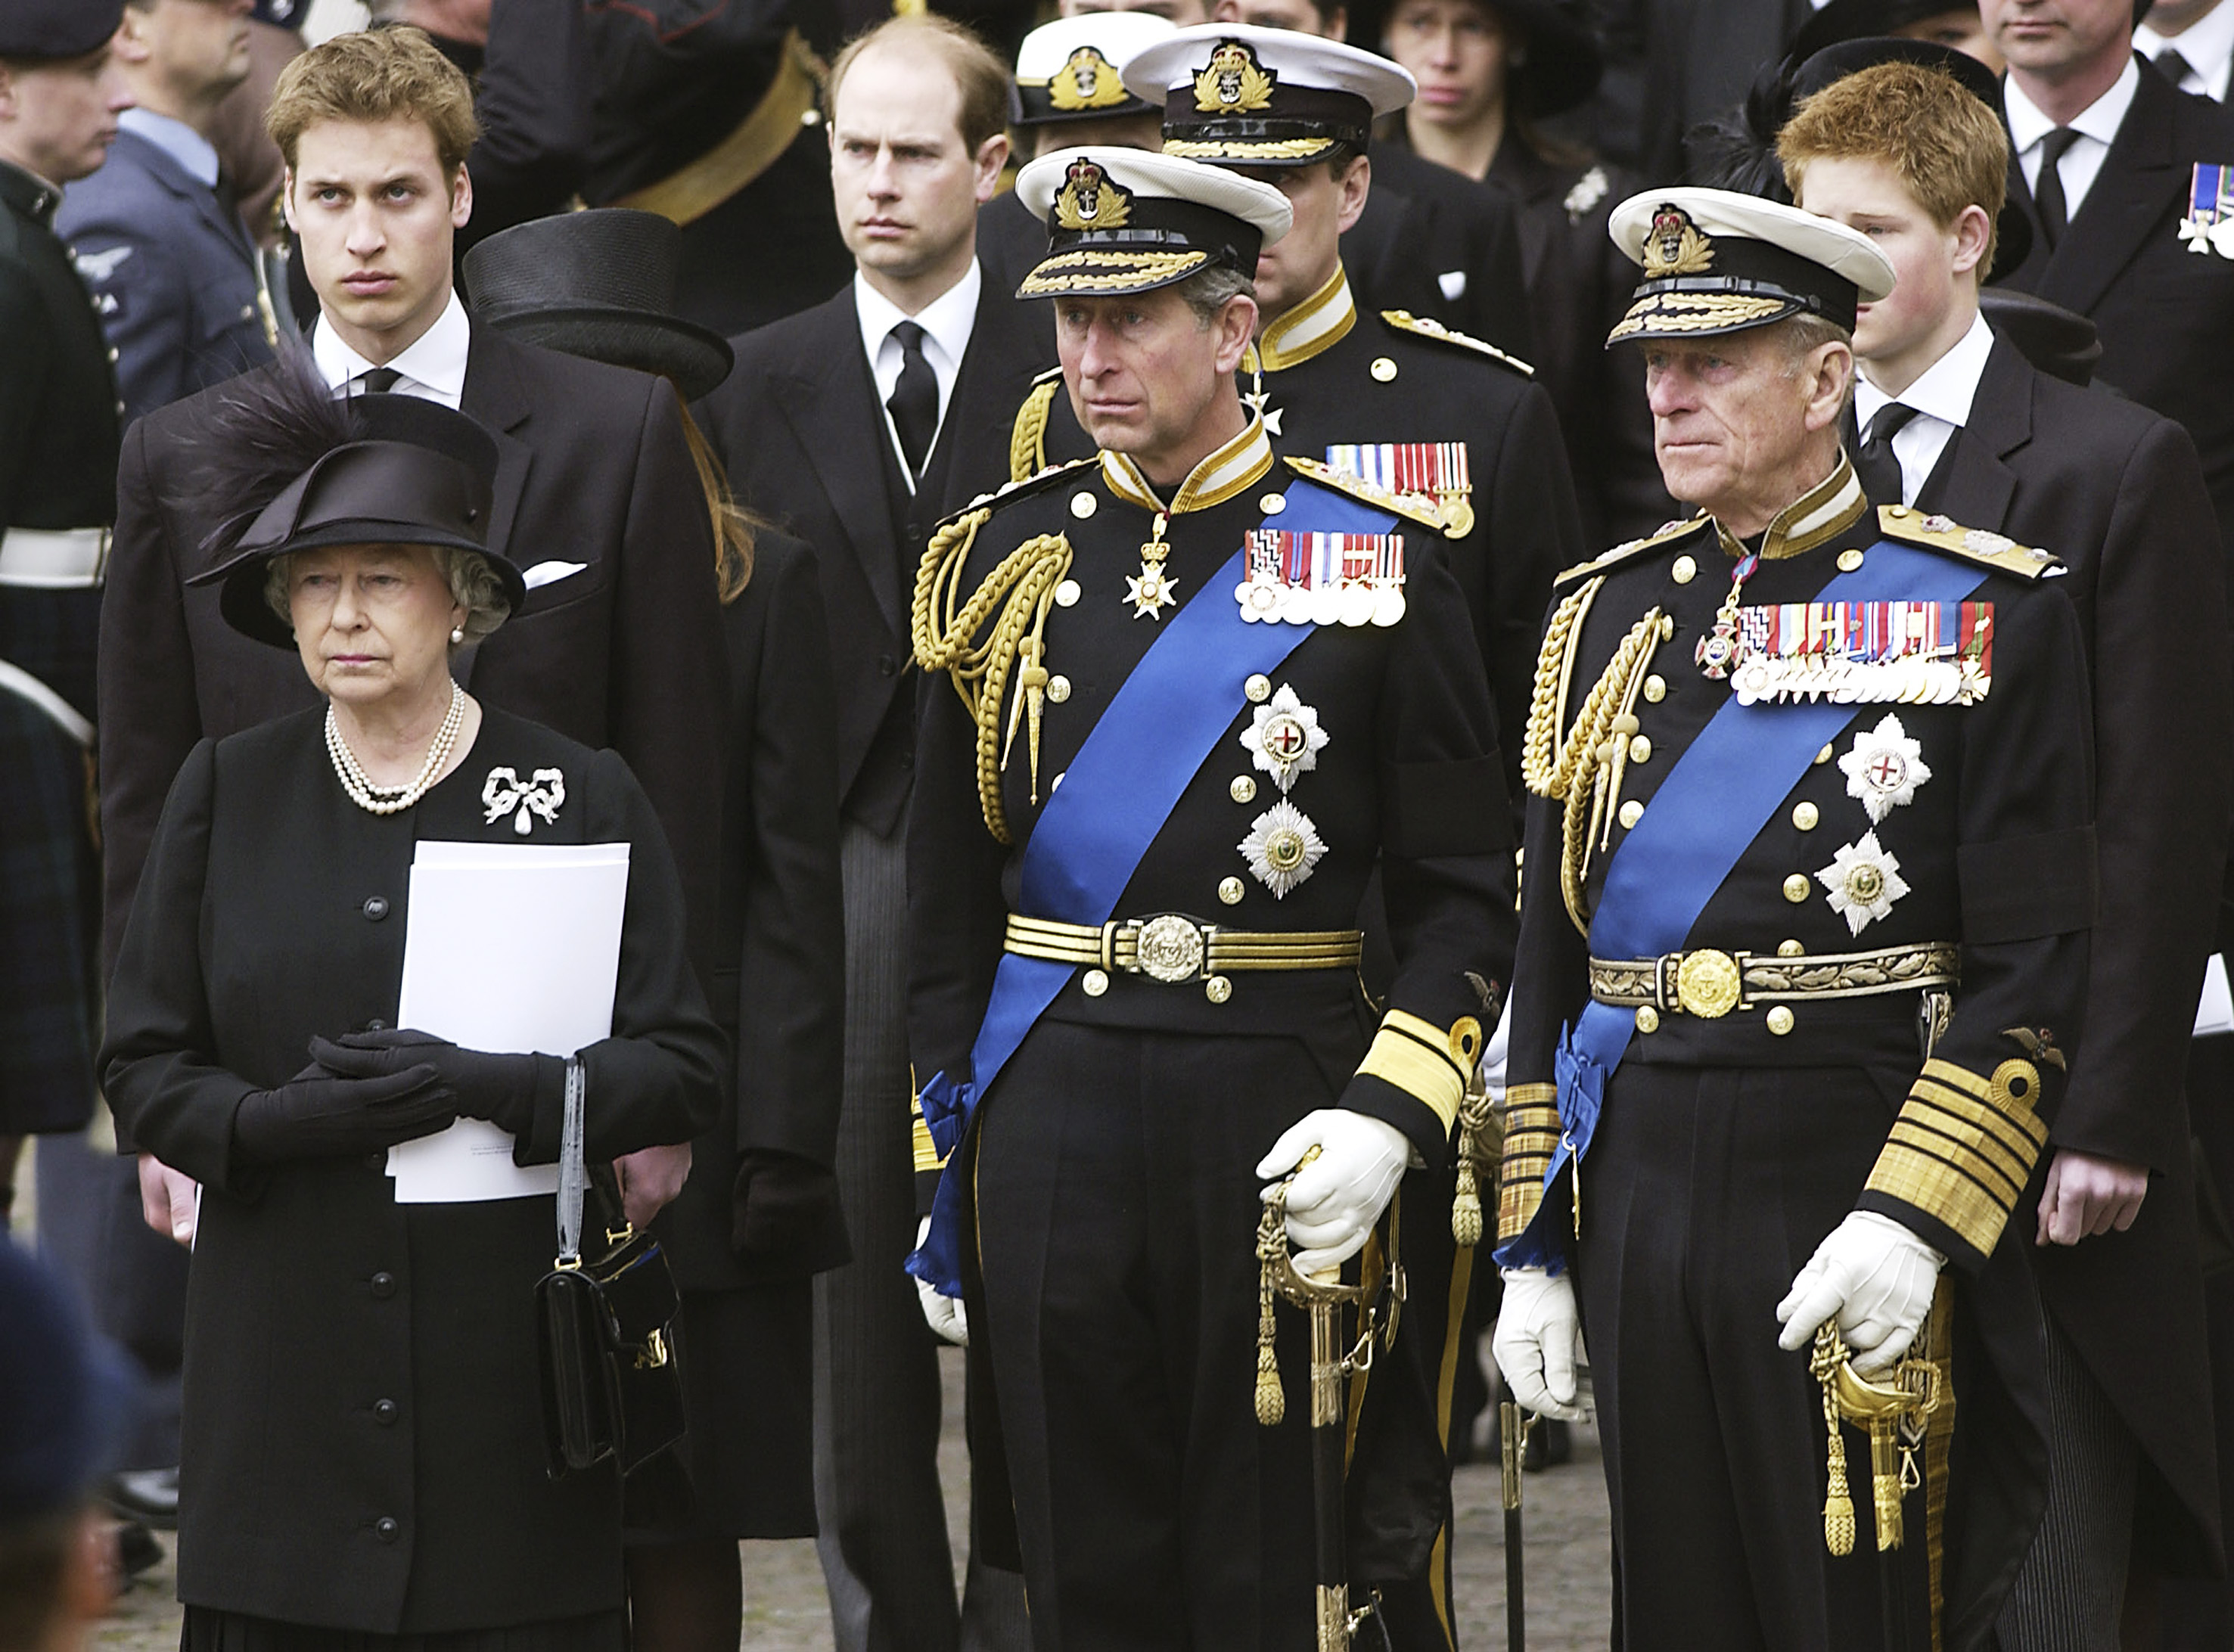 <p>Queen Elizabeth II mourned alongside son Prince Charles, husband Prince Philip and grandsons <a href="https://www.wonderwall.com/celebrity/profiles/overview/prince-william-482.article">Prince William</a> and <a href="https://www.wonderwall.com/celebrity/profiles/overview/prince-harry-481.article">Prince Harry</a> at <a href="https://www.wonderwall.com/celebrity/royal-funerals-through-the-decades-photos-princess-diana-margaret-queen-elizabeth-queen-mother-king-george-prince-philip-monarchs-more-445035.gallery?photoId=445074">the Queen Mother's funeral</a> at Westminster Abbey in London on April 9, 2002.</p>